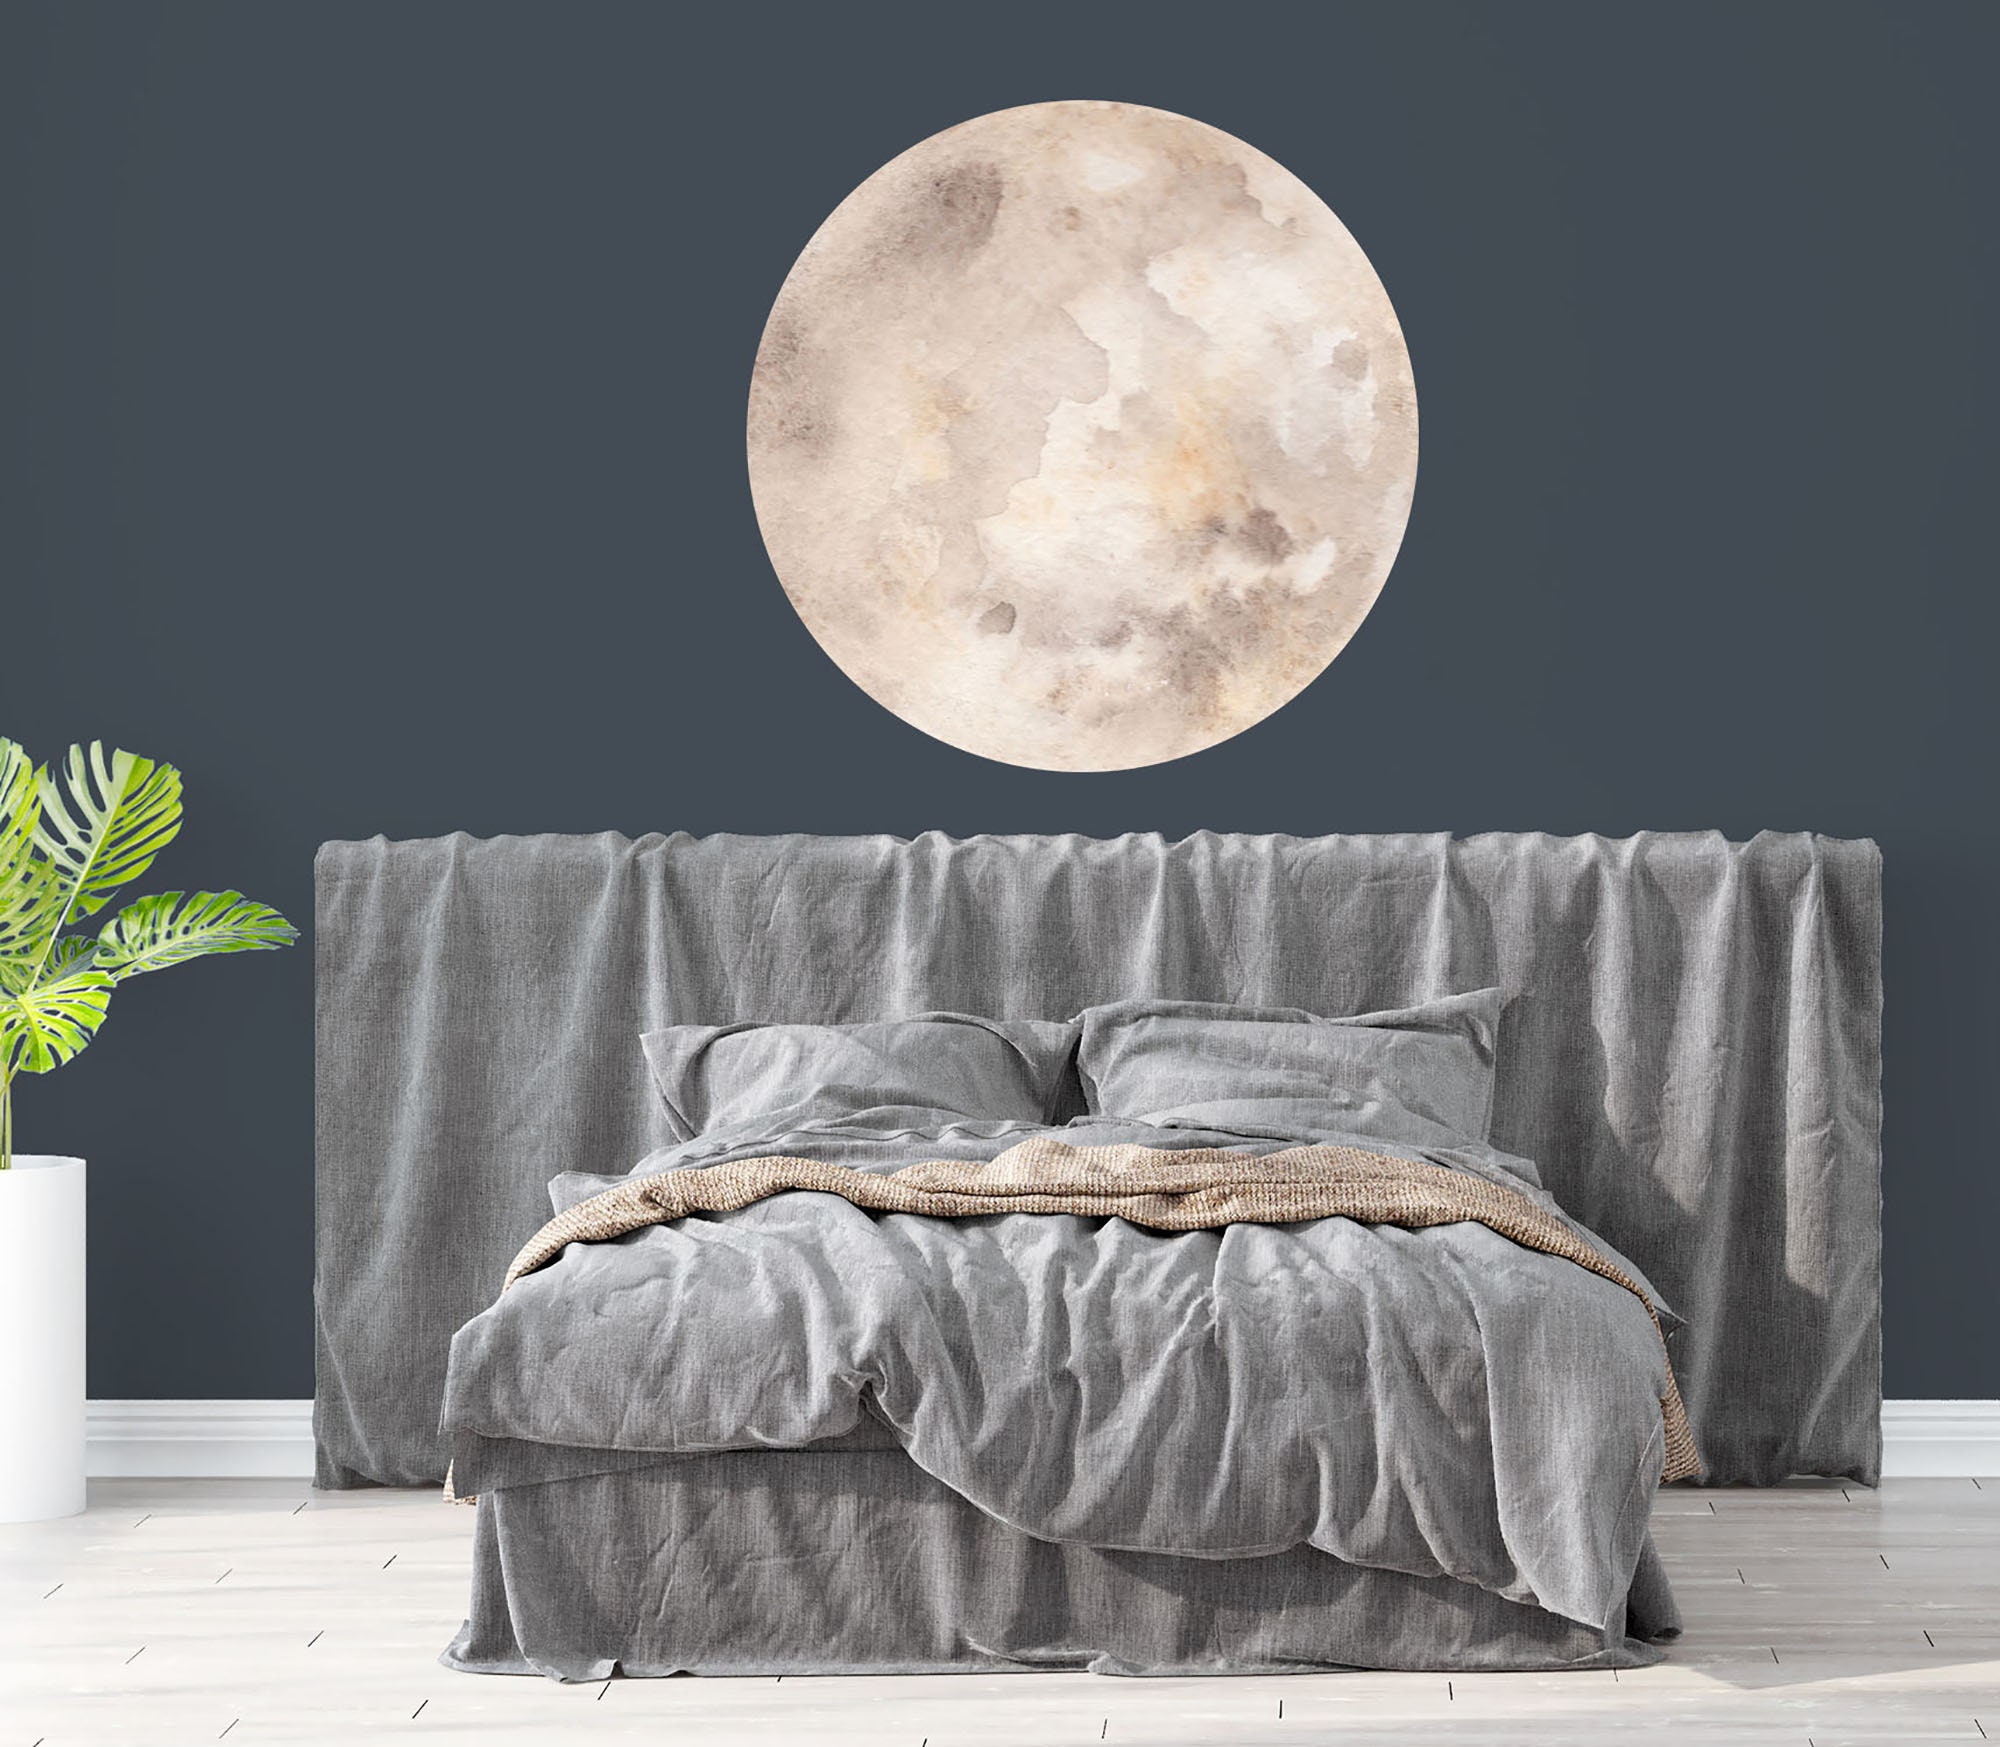 3D Moon Wall Decal. Watercolor Moon Nursery Decals. Space Themed Nursery  Decor. Kids Room Wall Stickers. Realistic Moon Wall Mural NS2087 - Etsy